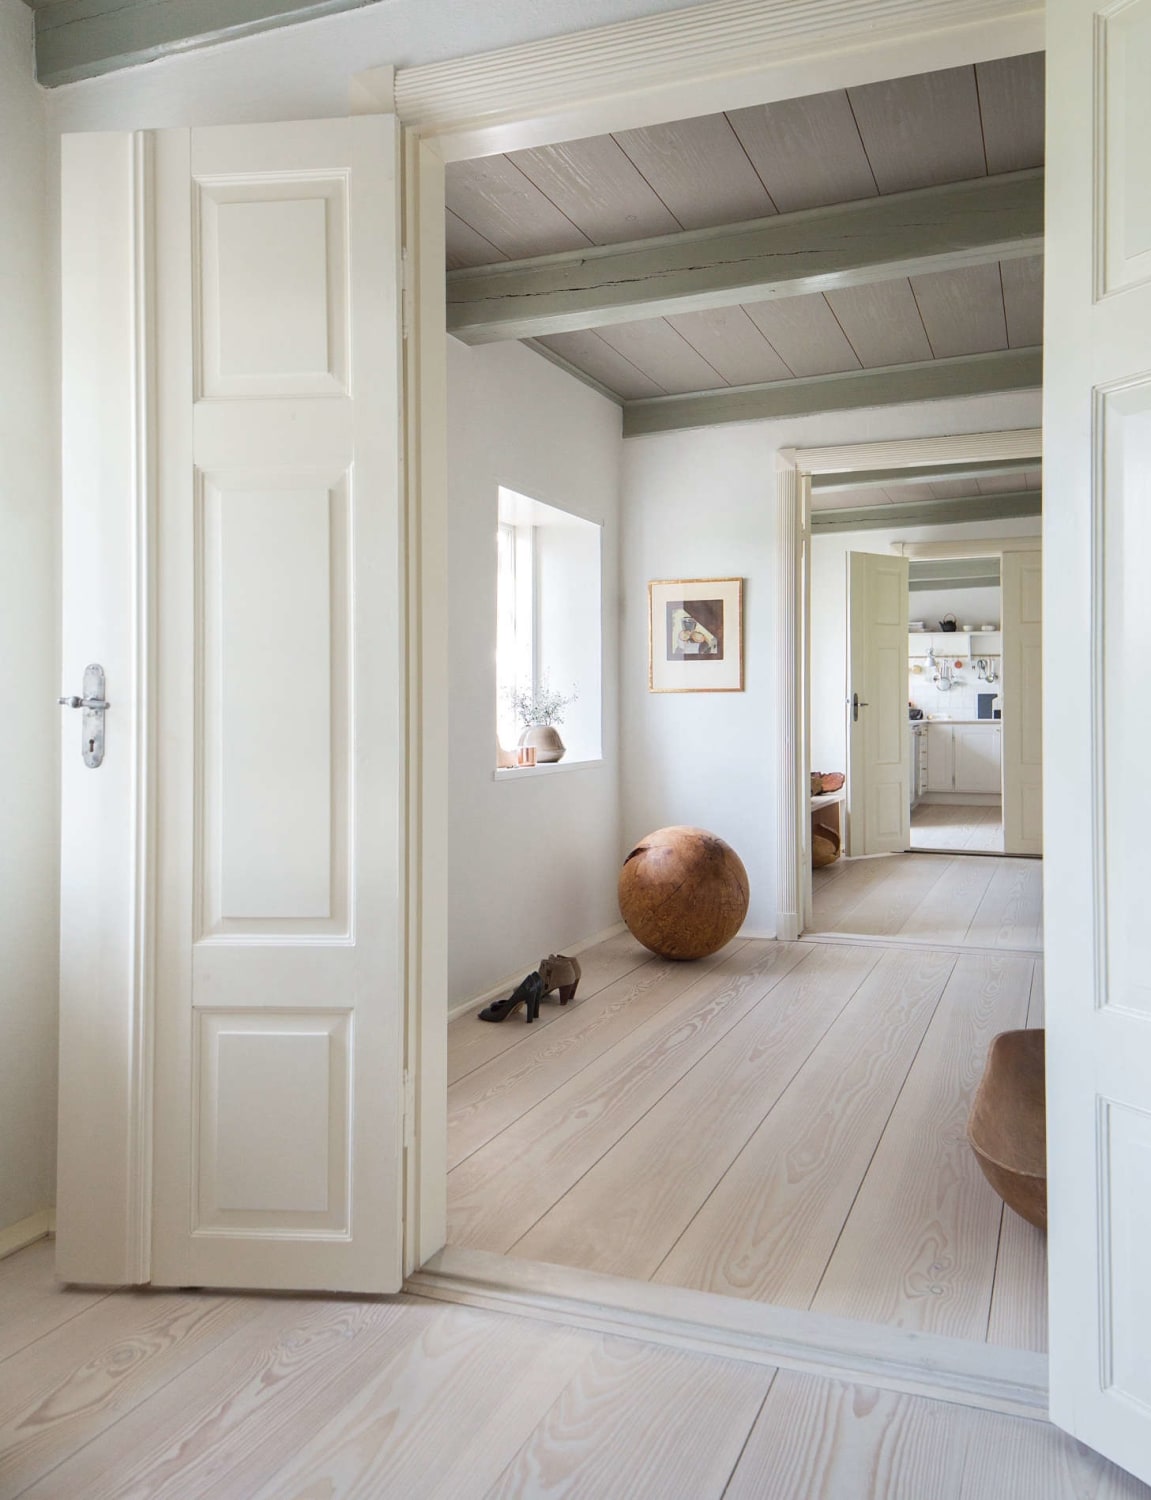 Remodeling 101: A Guide to the Only 6 Wood Flooring Styles You Need to Know